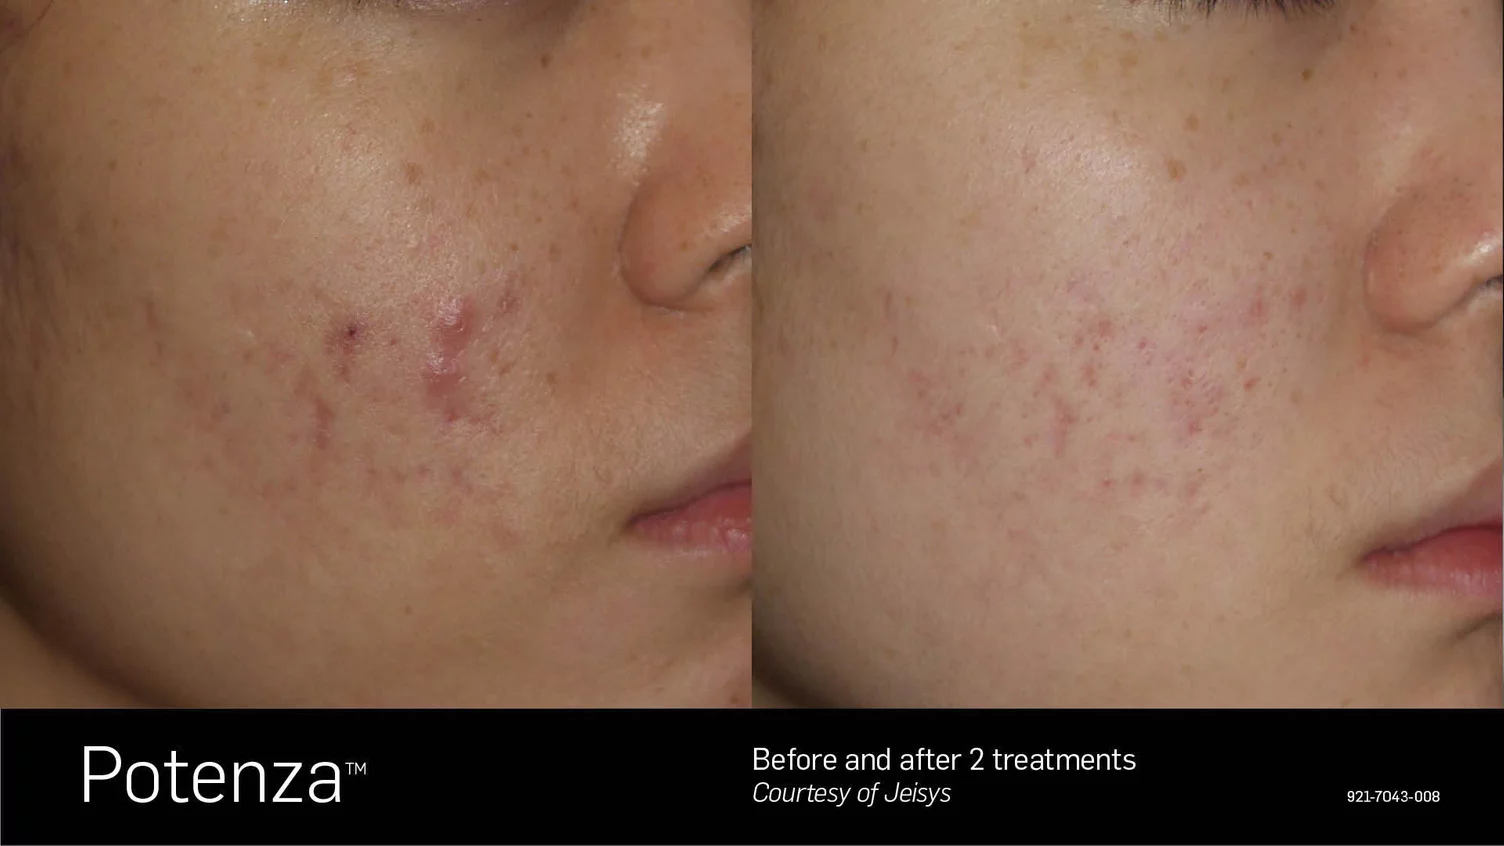 Potenza RF Microneedling for acne scars